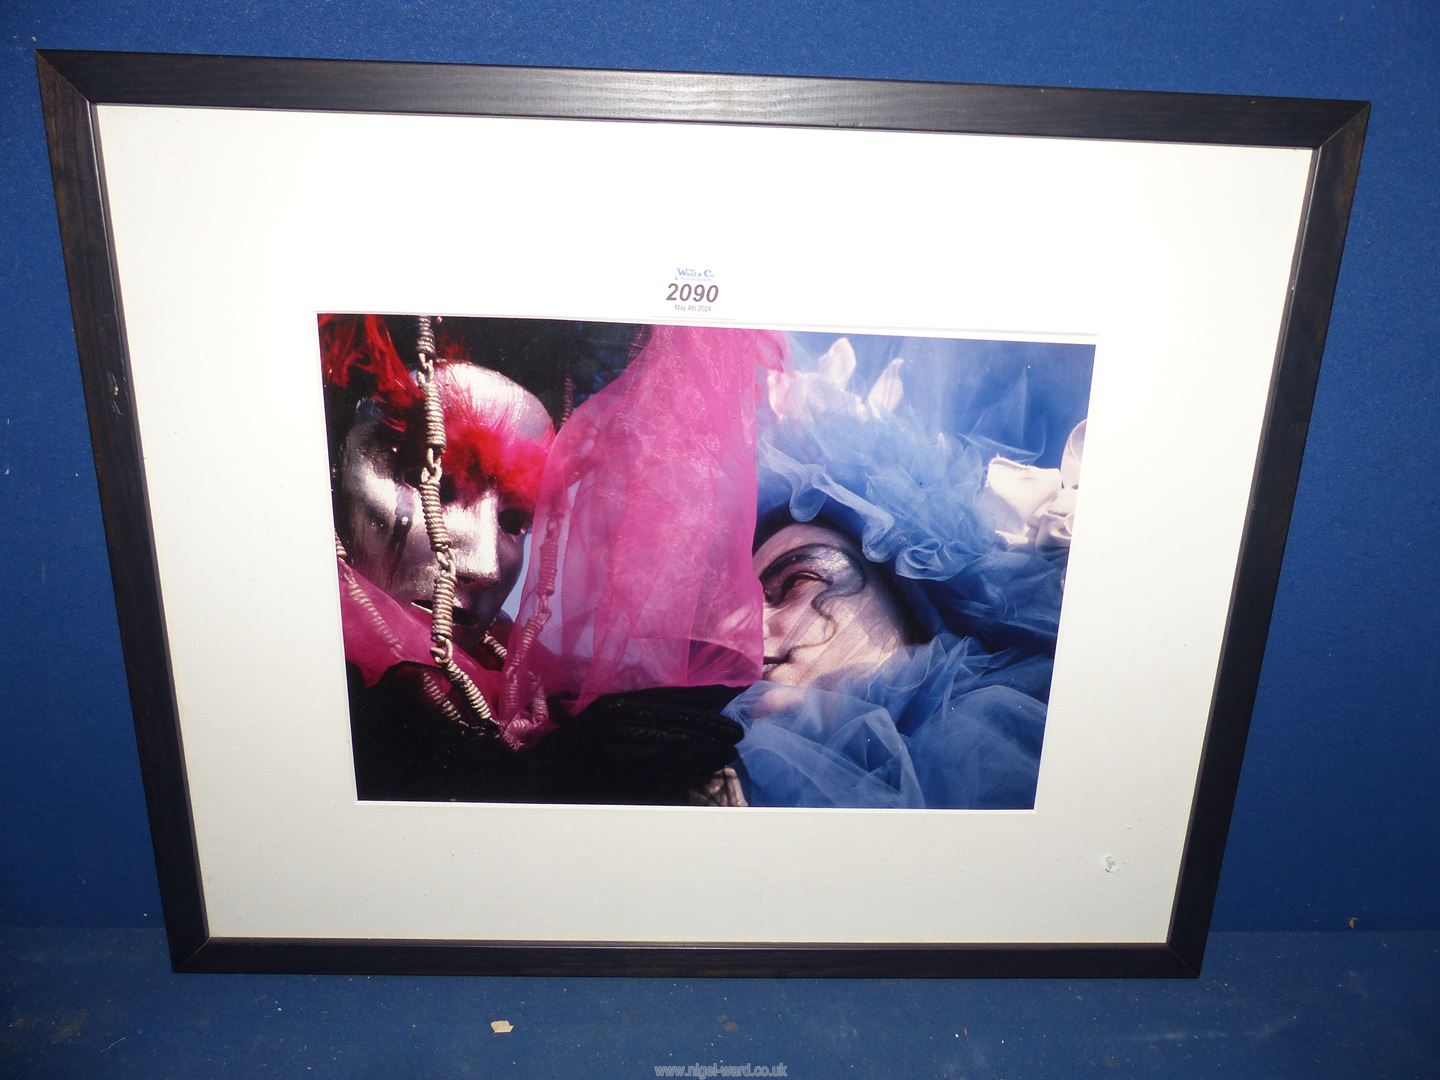 A framed Photograph by a renowned Italian Photographer.